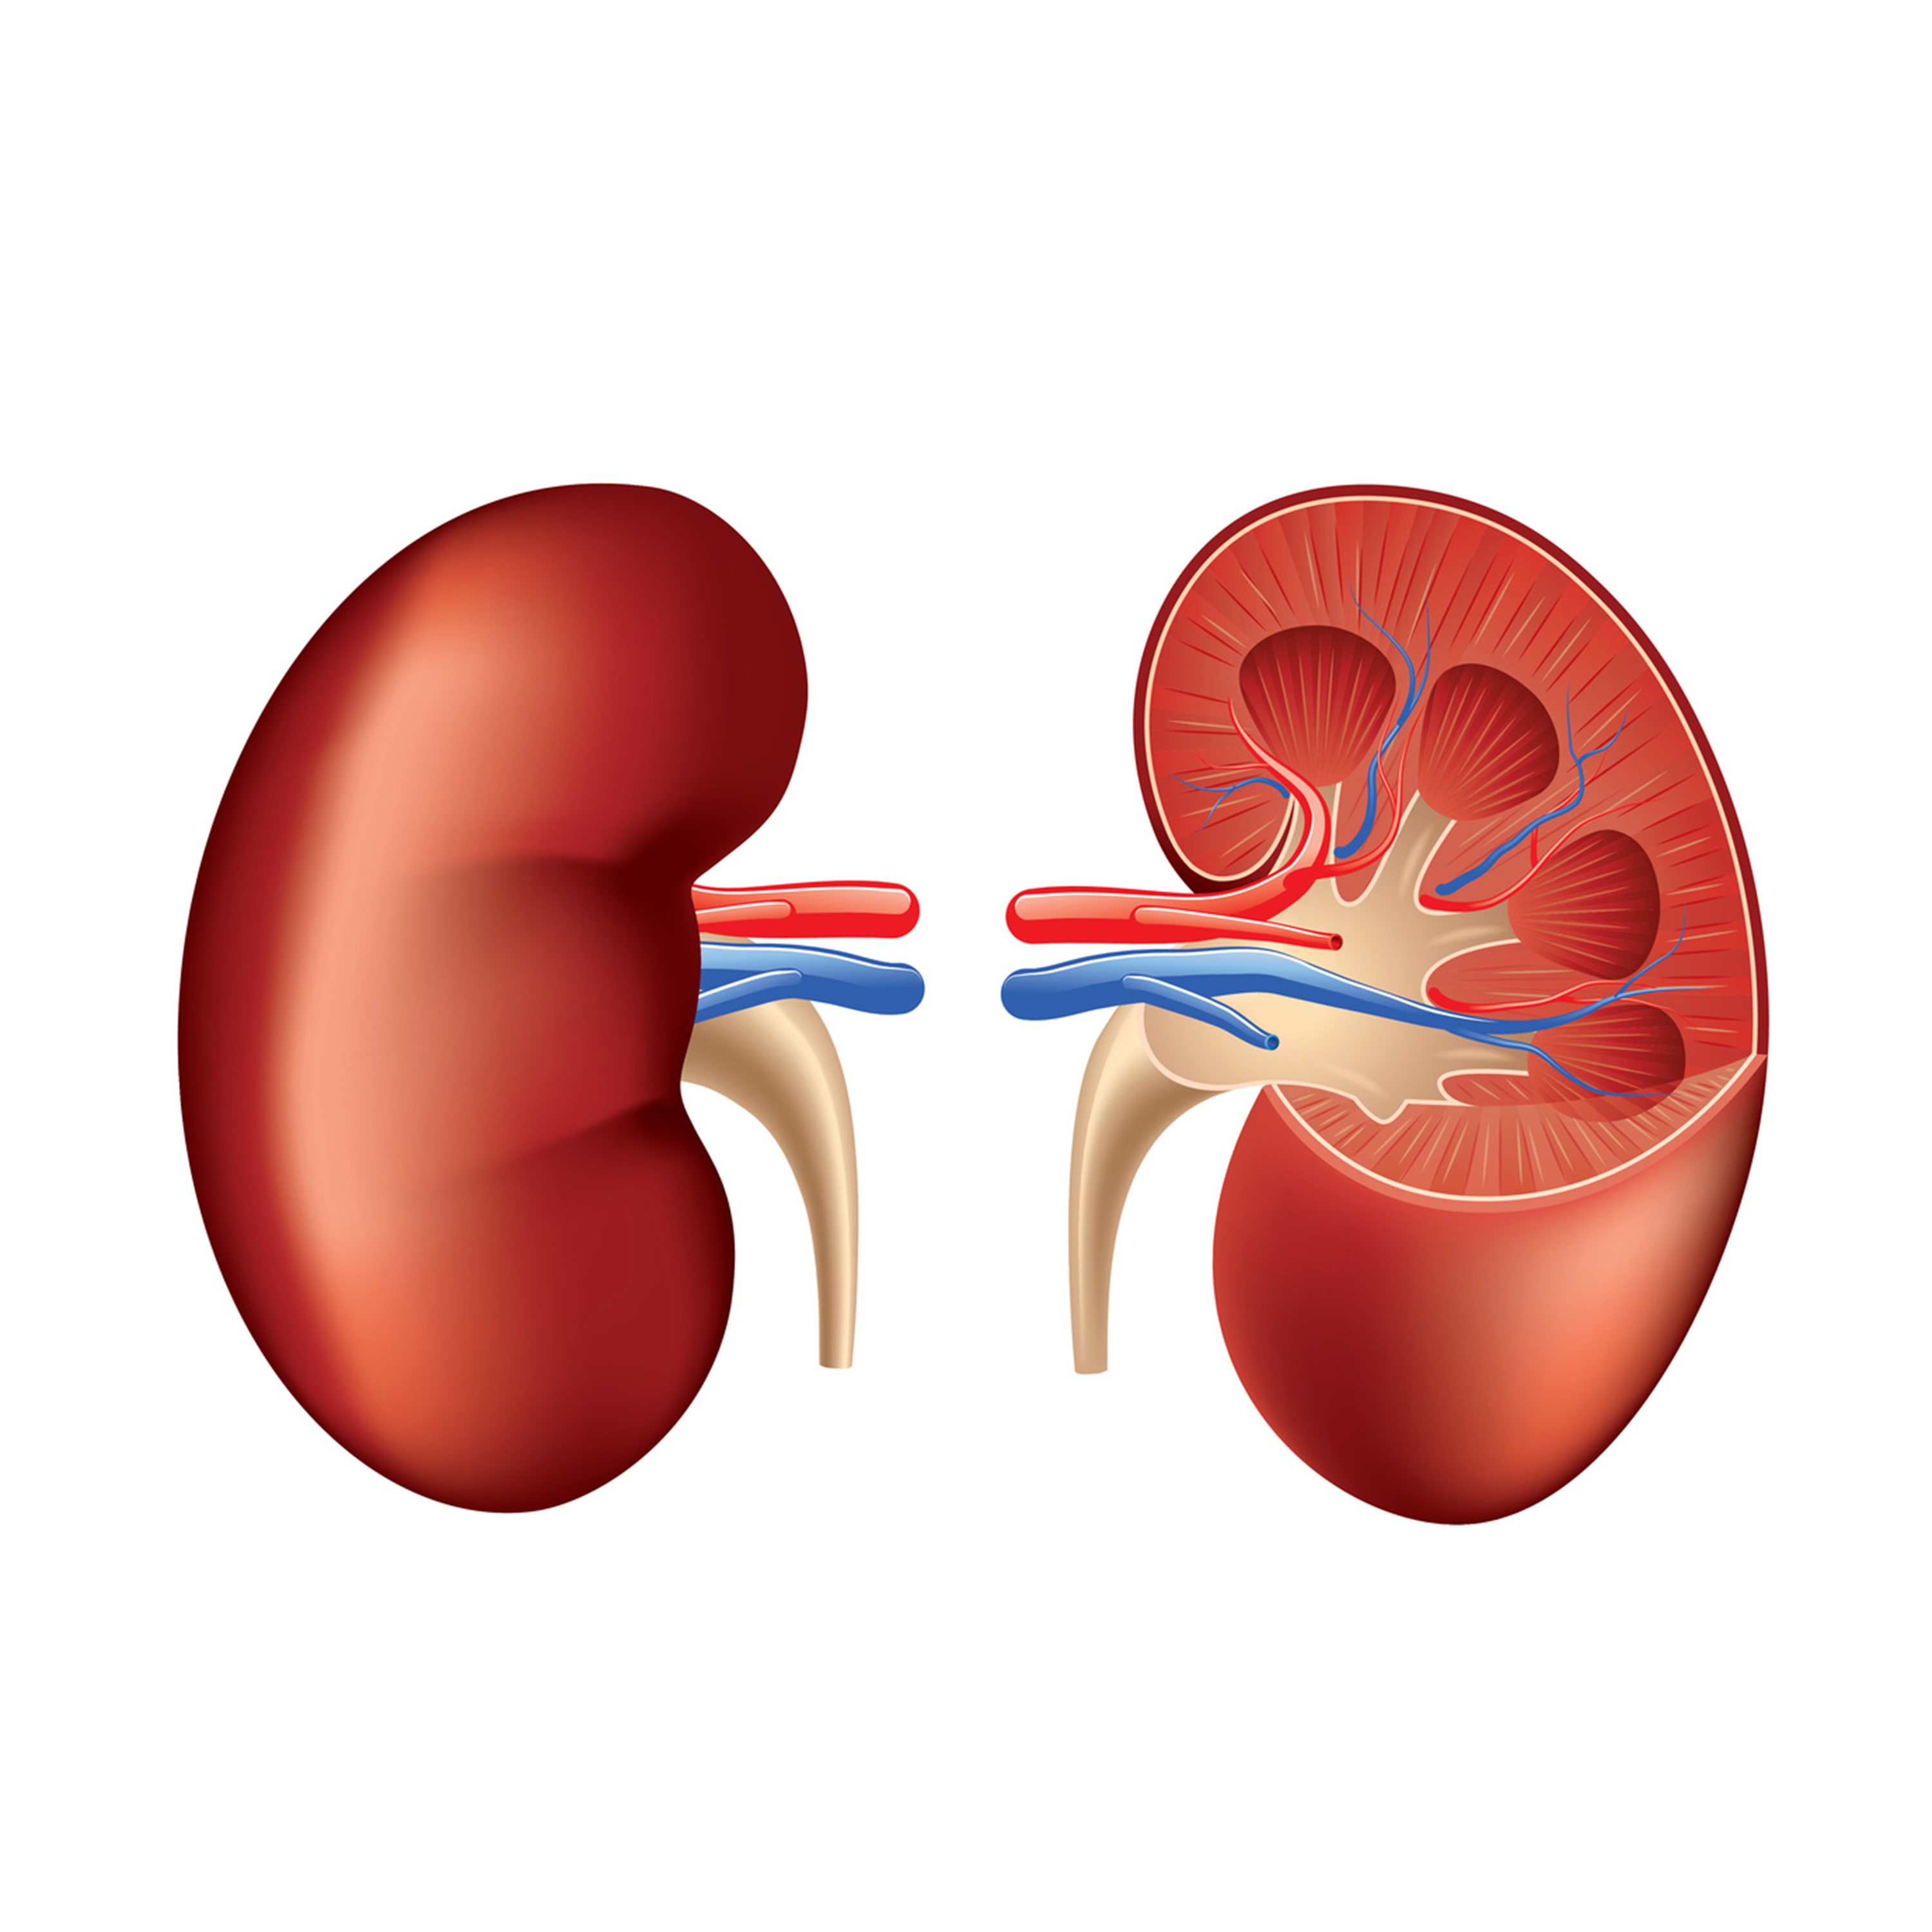 A new study shows that only one-third of patients who ultimately receive a living donor kidney transplant receive it before starting dialysis.